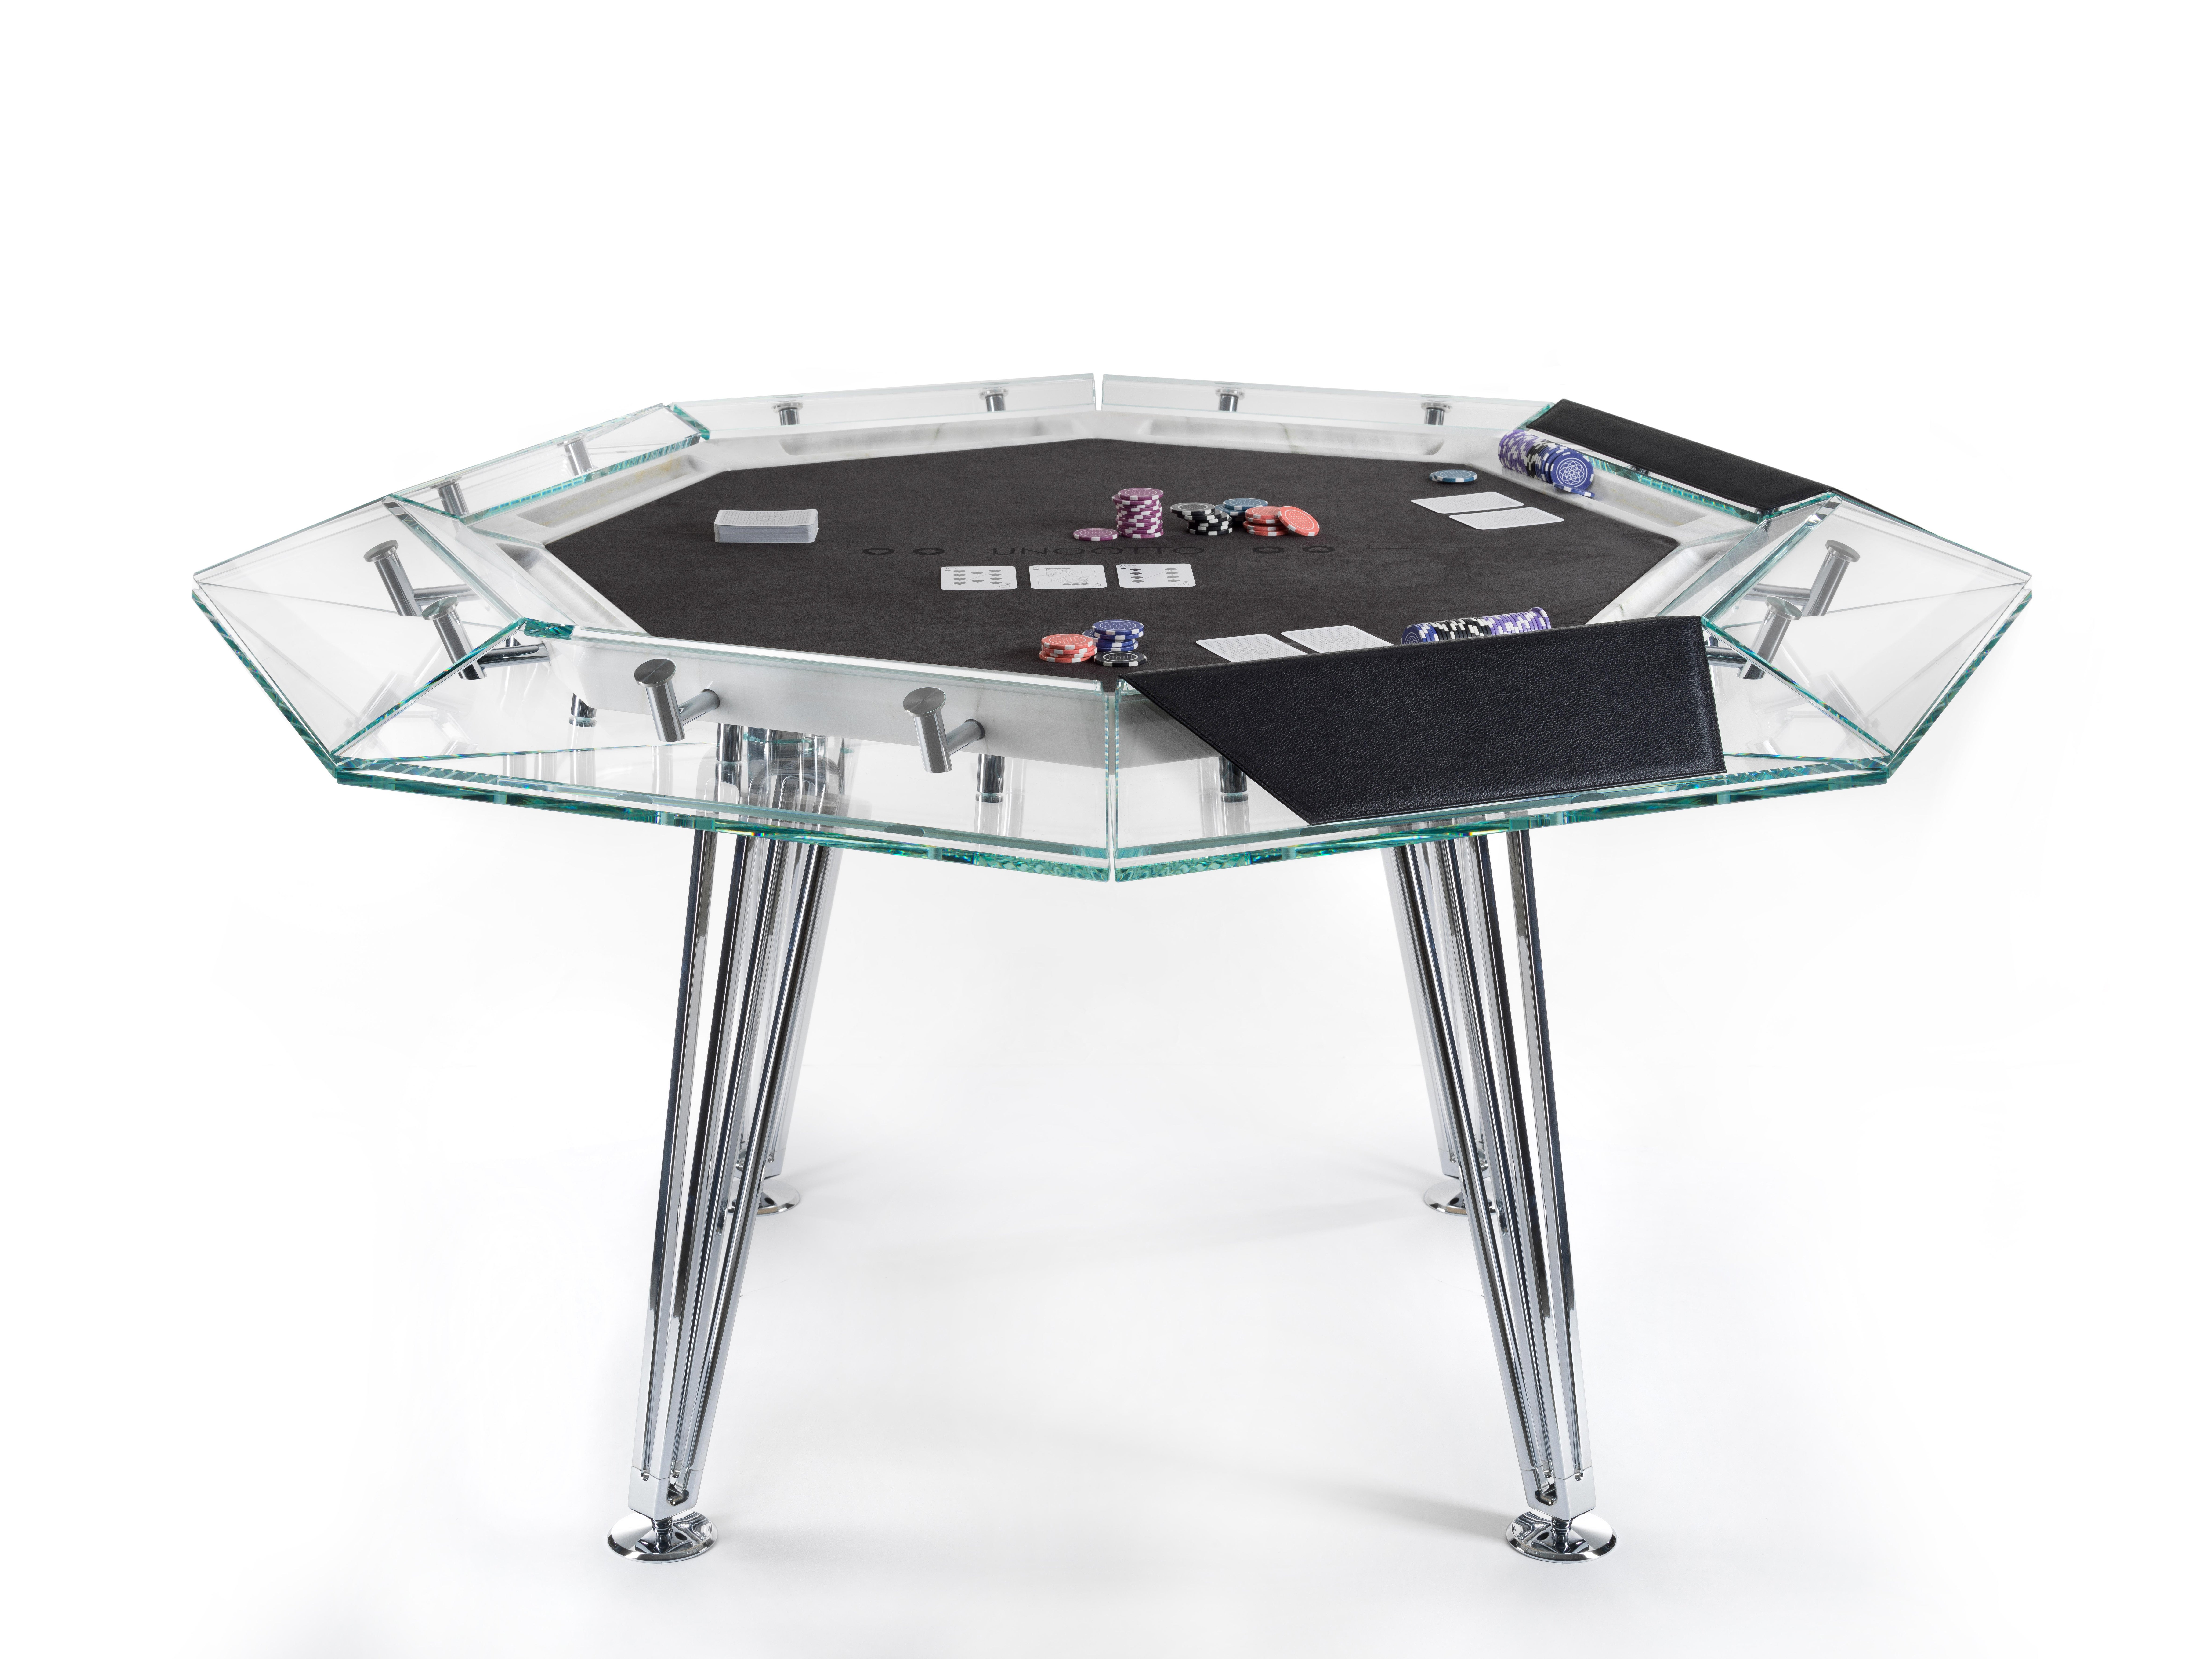 Italian Unootto Marble Edition, 8 Player Poker Table, by Impatia